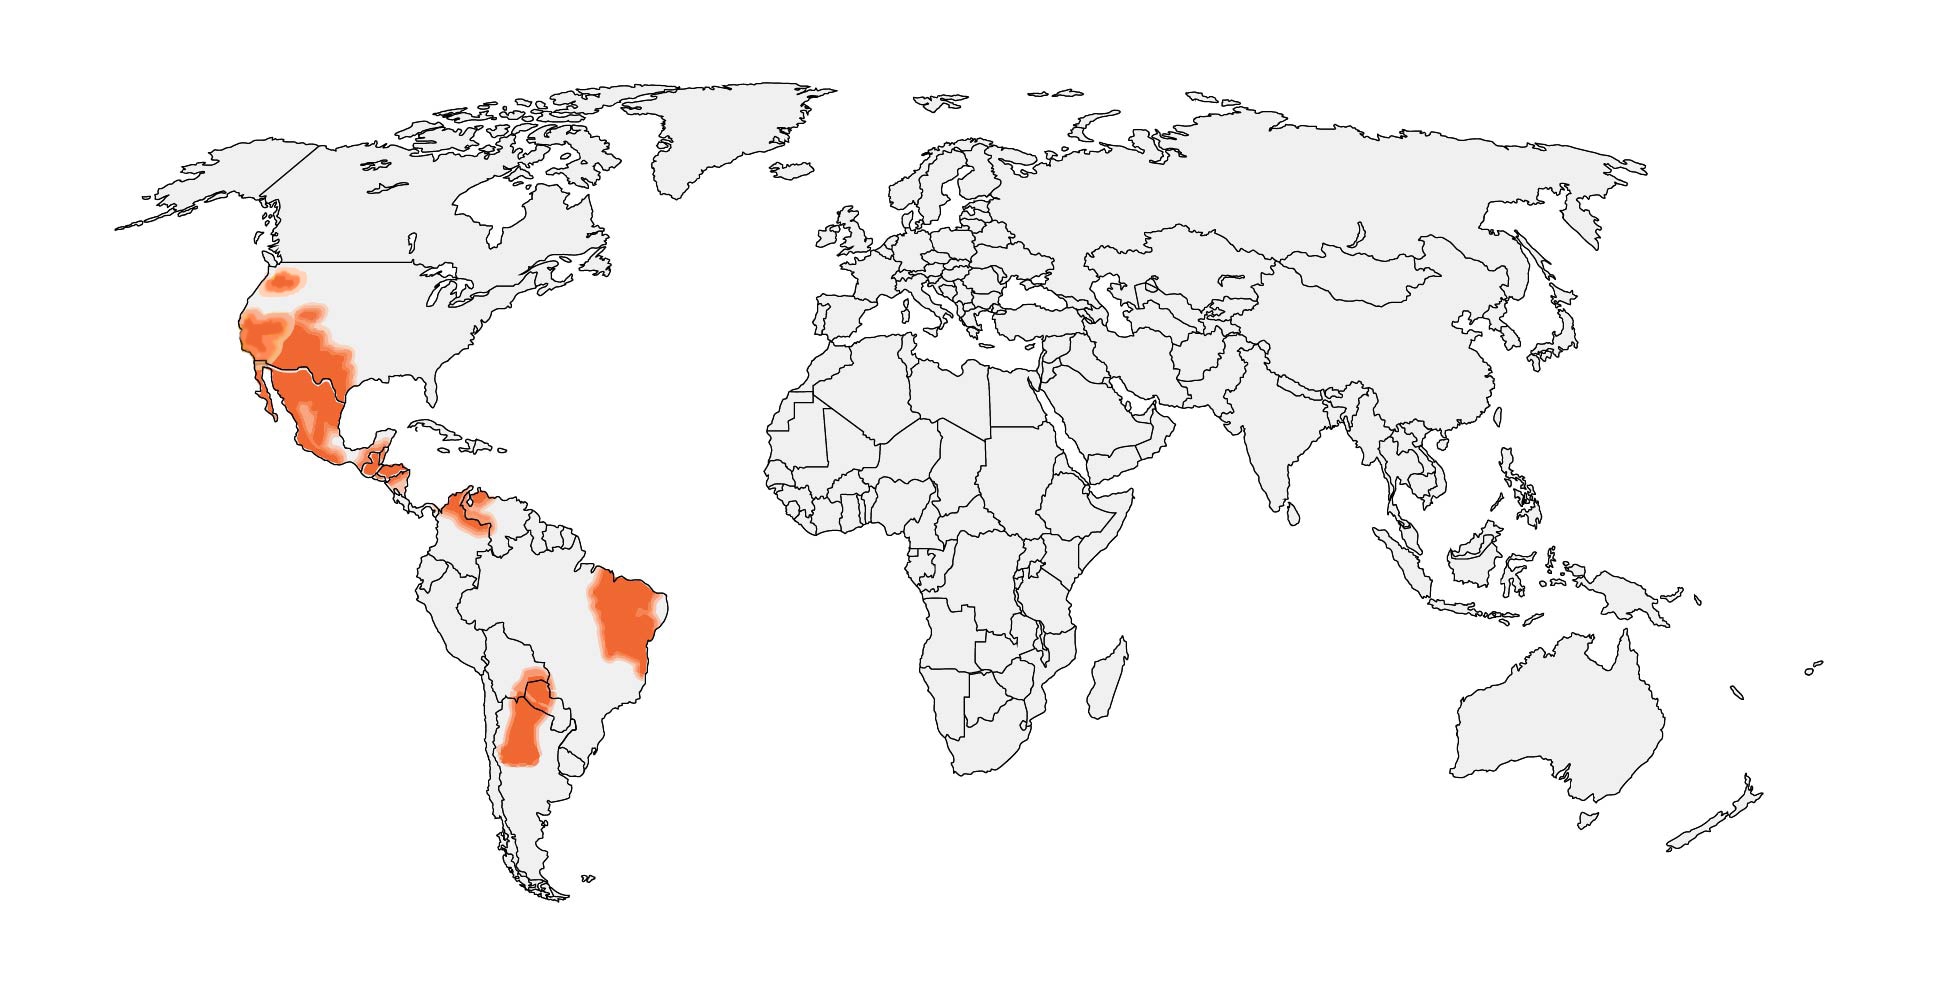 Global map showing where patients live in or have traveled to a coccidiodomycosis endemic area - western U.S., Brazil, and Argentina